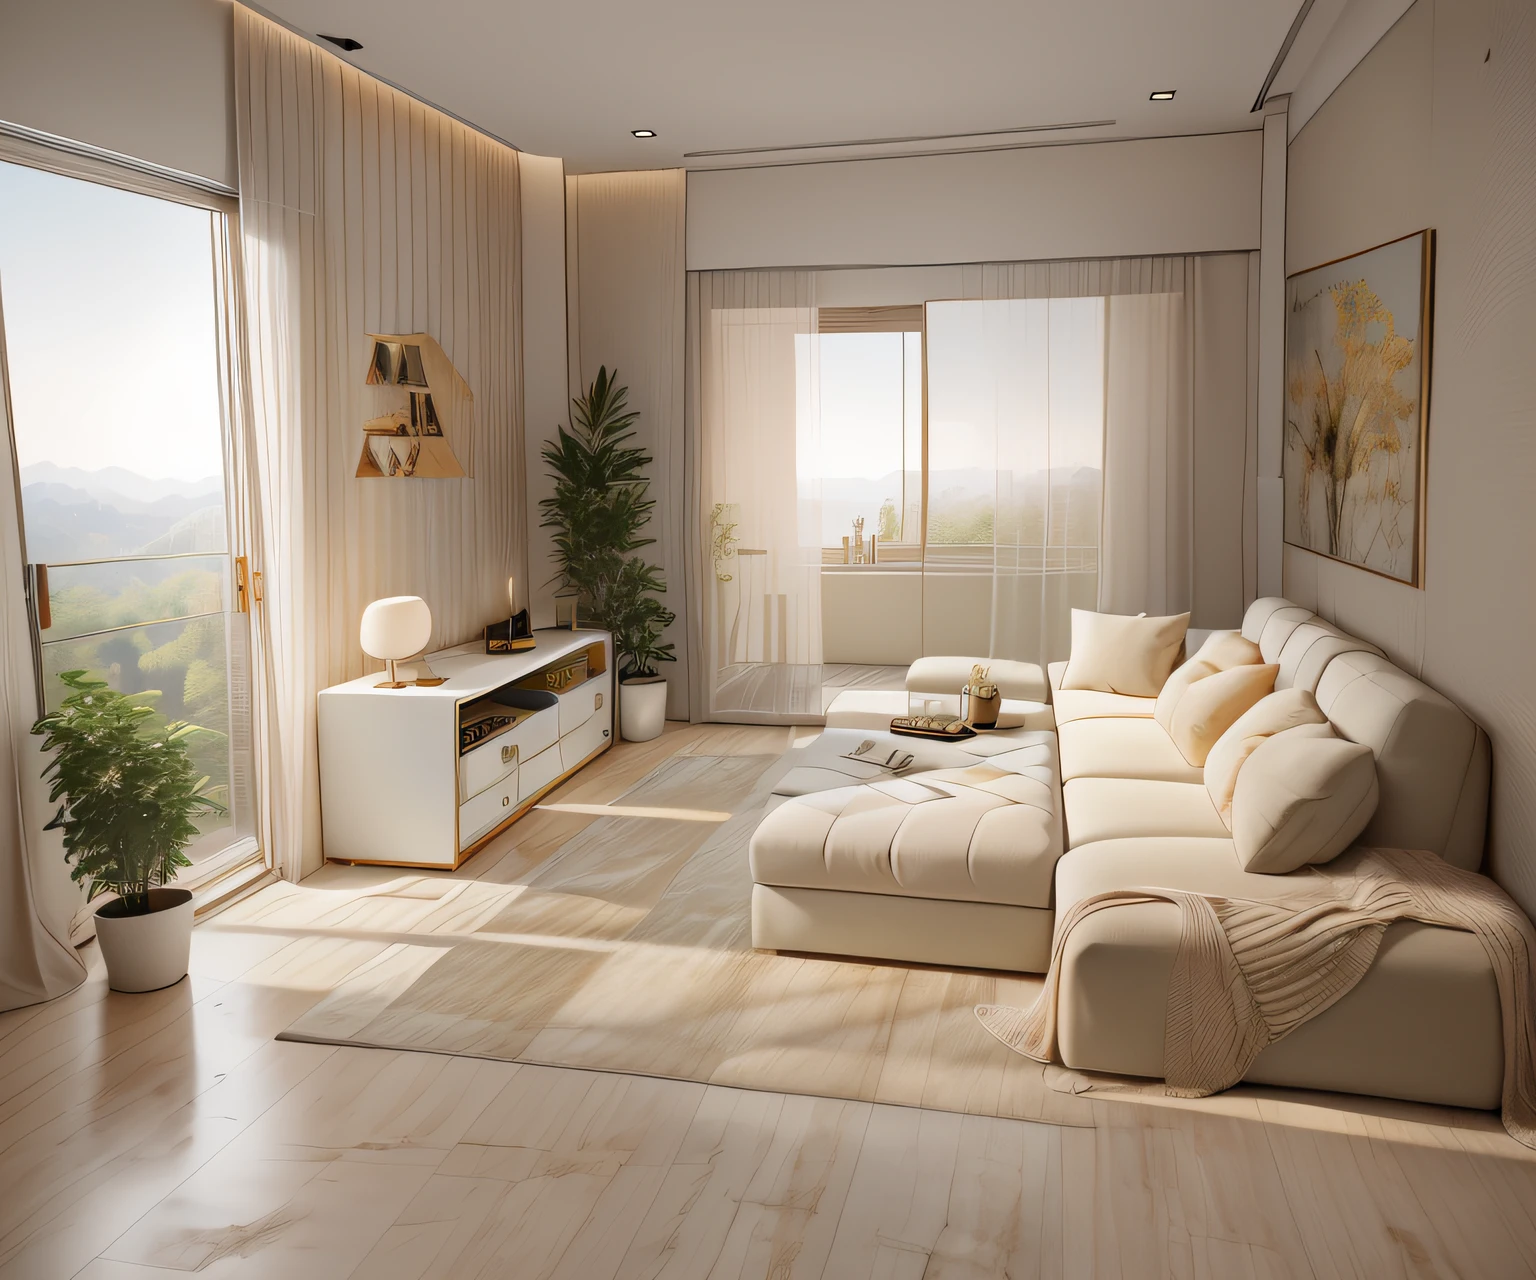 There is a white sofa in the living room with TV, 1 black TV，natural light in room, interior living room, living room interior, Ultra photo realsisim， tmasterpiece， best qualtiy， ultra - detailed， Ultra-high resolution， RAW photogr， 8K， tmasterpiece，Ultra photo realsisim，32k，the Extremely Detailed CG Unity 8K Wallpapers，best qualtiy